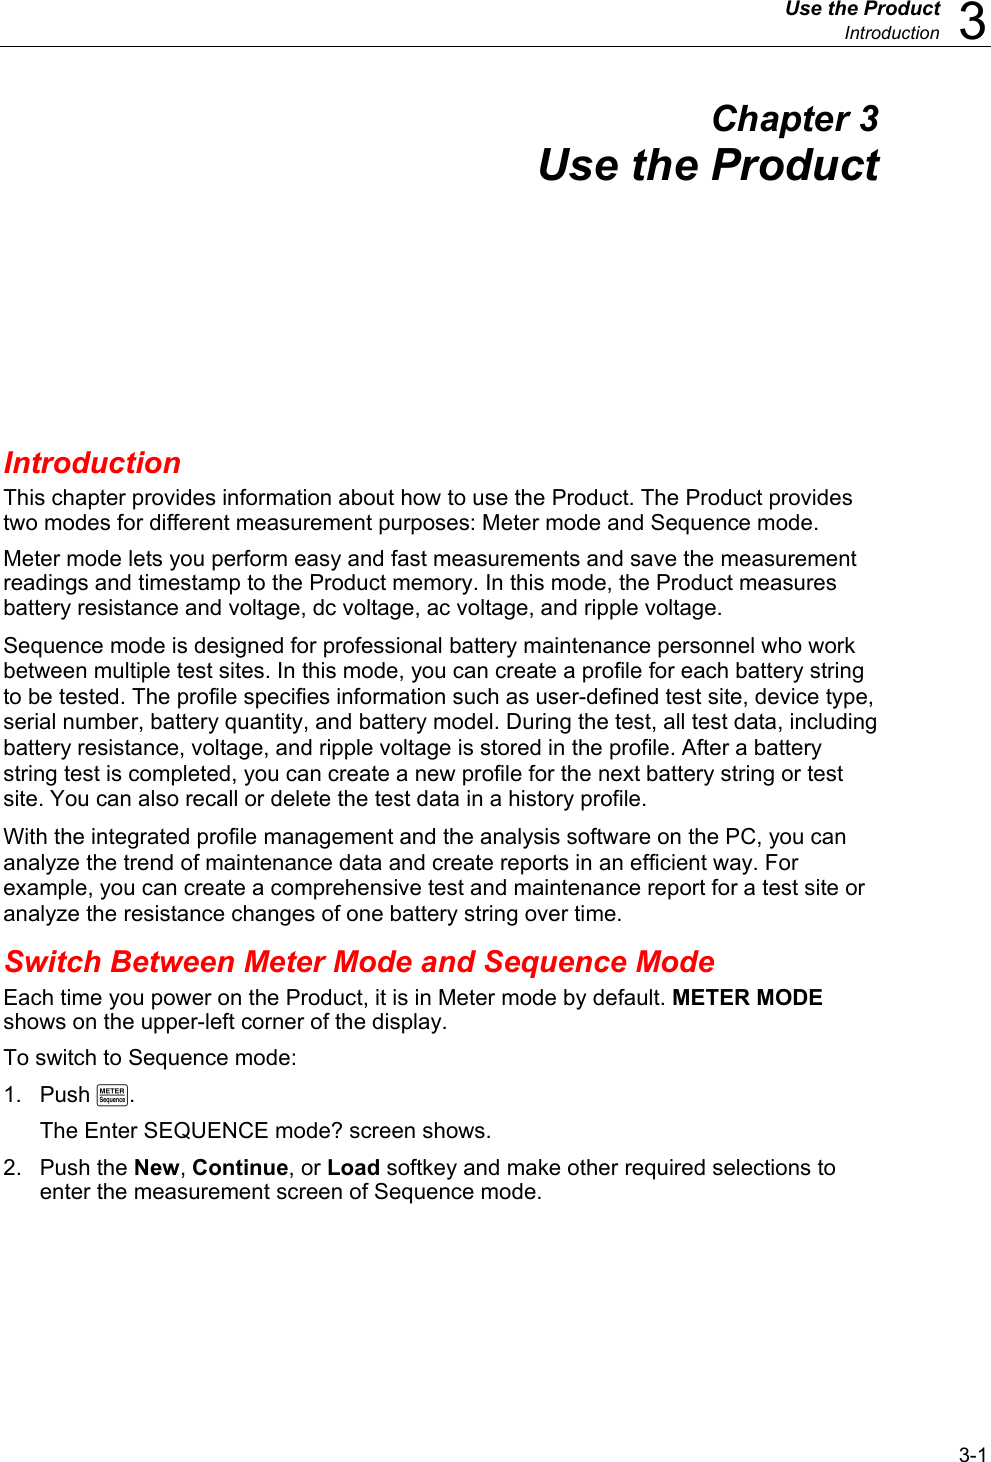  Use the Product  Introduction  3 3-1 Chapter 3 Use the Product Introduction This chapter provides information about how to use the Product. The Product provides two modes for different measurement purposes: Meter mode and Sequence mode. Meter mode lets you perform easy and fast measurements and save the measurement readings and timestamp to the Product memory. In this mode, the Product measures battery resistance and voltage, dc voltage, ac voltage, and ripple voltage. Sequence mode is designed for professional battery maintenance personnel who work between multiple test sites. In this mode, you can create a profile for each battery string to be tested. The profile specifies information such as user-defined test site, device type, serial number, battery quantity, and battery model. During the test, all test data, including battery resistance, voltage, and ripple voltage is stored in the profile. After a battery string test is completed, you can create a new profile for the next battery string or test site. You can also recall or delete the test data in a history profile. With the integrated profile management and the analysis software on the PC, you can analyze the trend of maintenance data and create reports in an efficient way. For example, you can create a comprehensive test and maintenance report for a test site or analyze the resistance changes of one battery string over time. Switch Between Meter Mode and Sequence Mode Each time you power on the Product, it is in Meter mode by default. METER MODE shows on the upper-left corner of the display. To switch to Sequence mode:  1. Push M. The Enter SEQUENCE mode? screen shows. 2. Push the New, Continue, or Load softkey and make other required selections to enter the measurement screen of Sequence mode. 